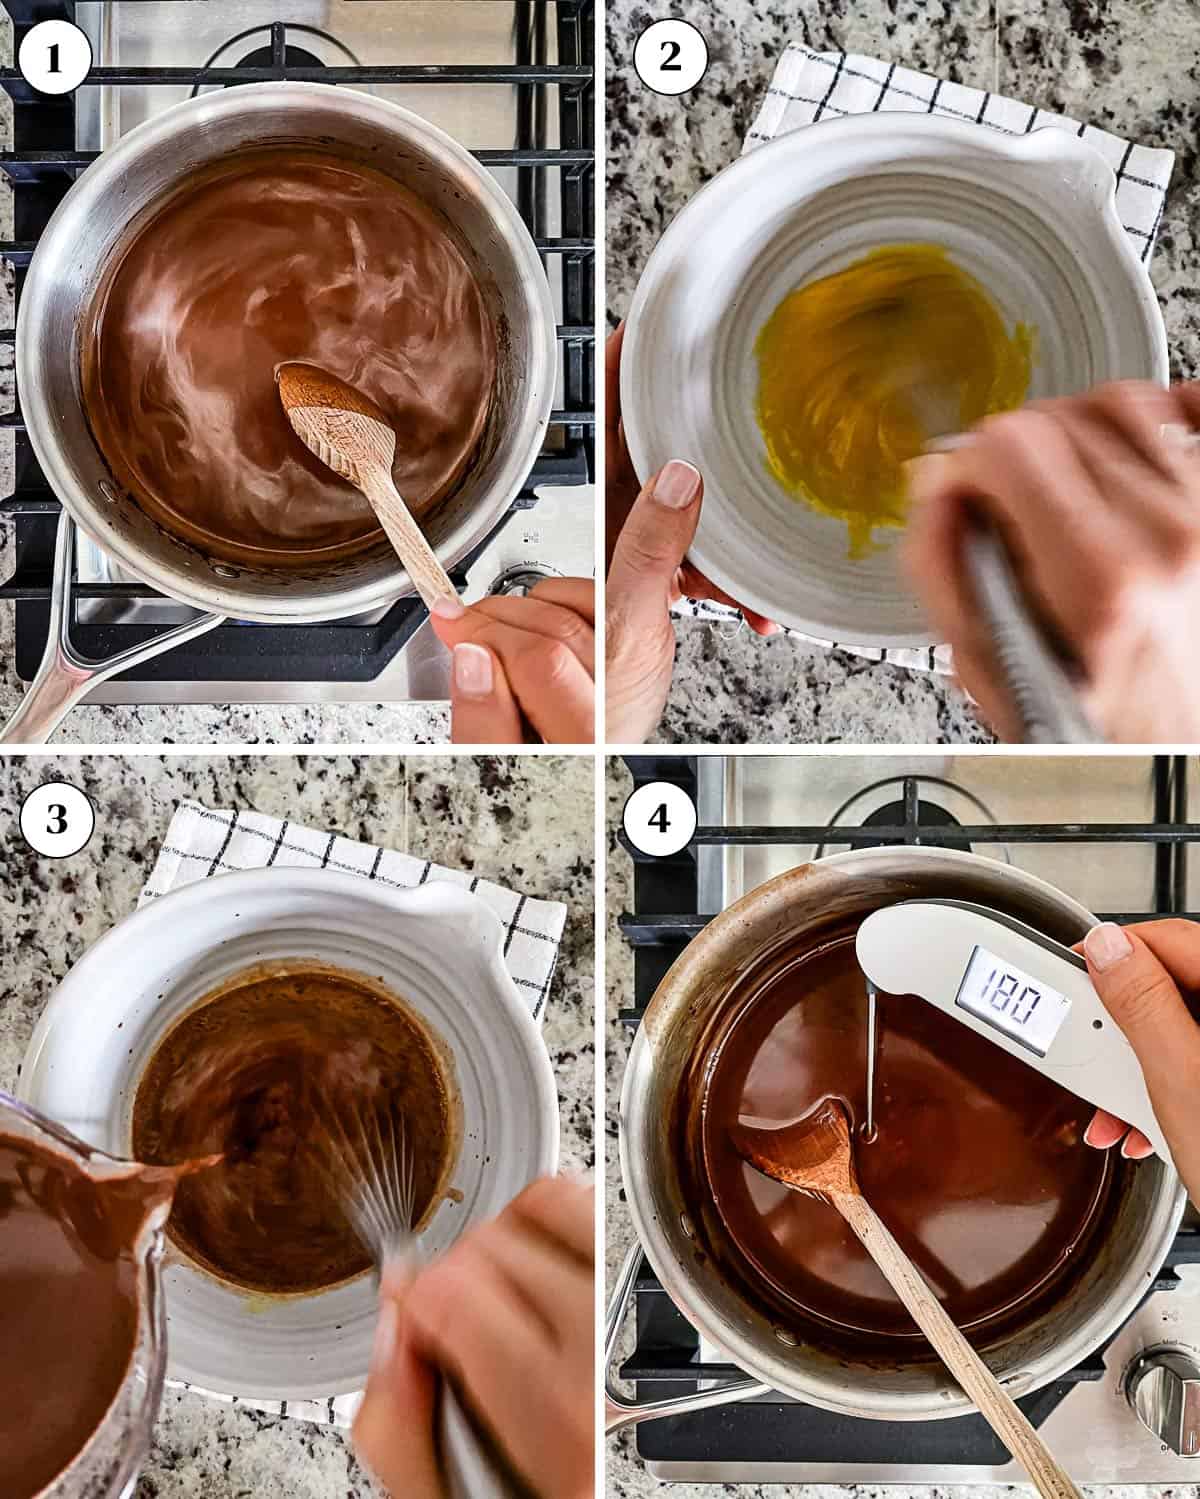 A collage of images showing how to make chocolate ice cream with honey.